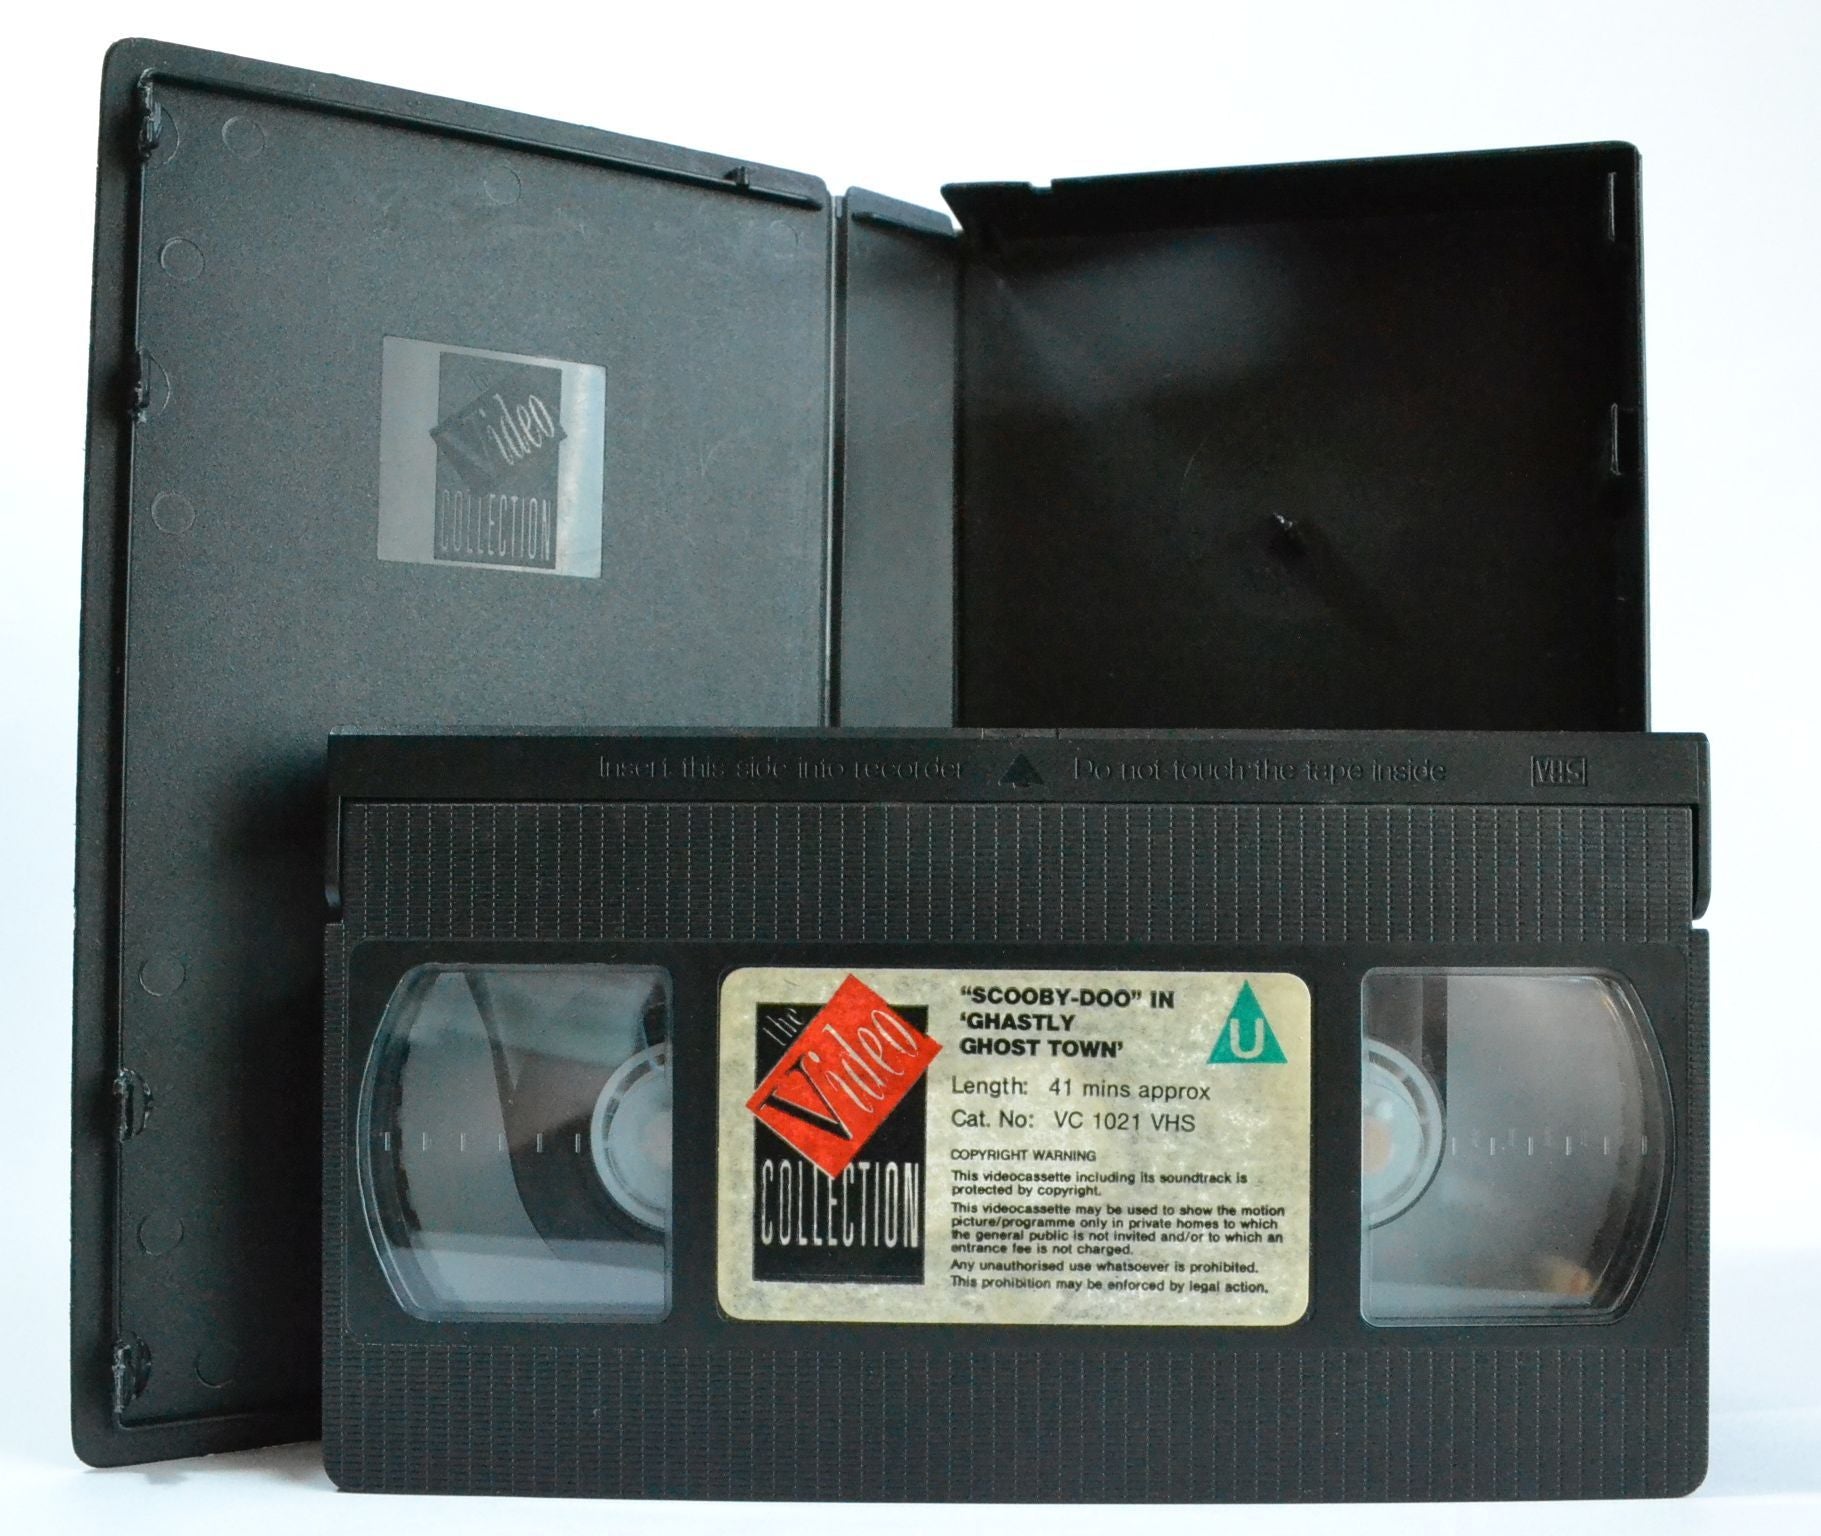 Scooby-Do: In Ghastly Ghost Town (1972) - Kaleidoscope Pre-Cert [3 Stooges] VHS-